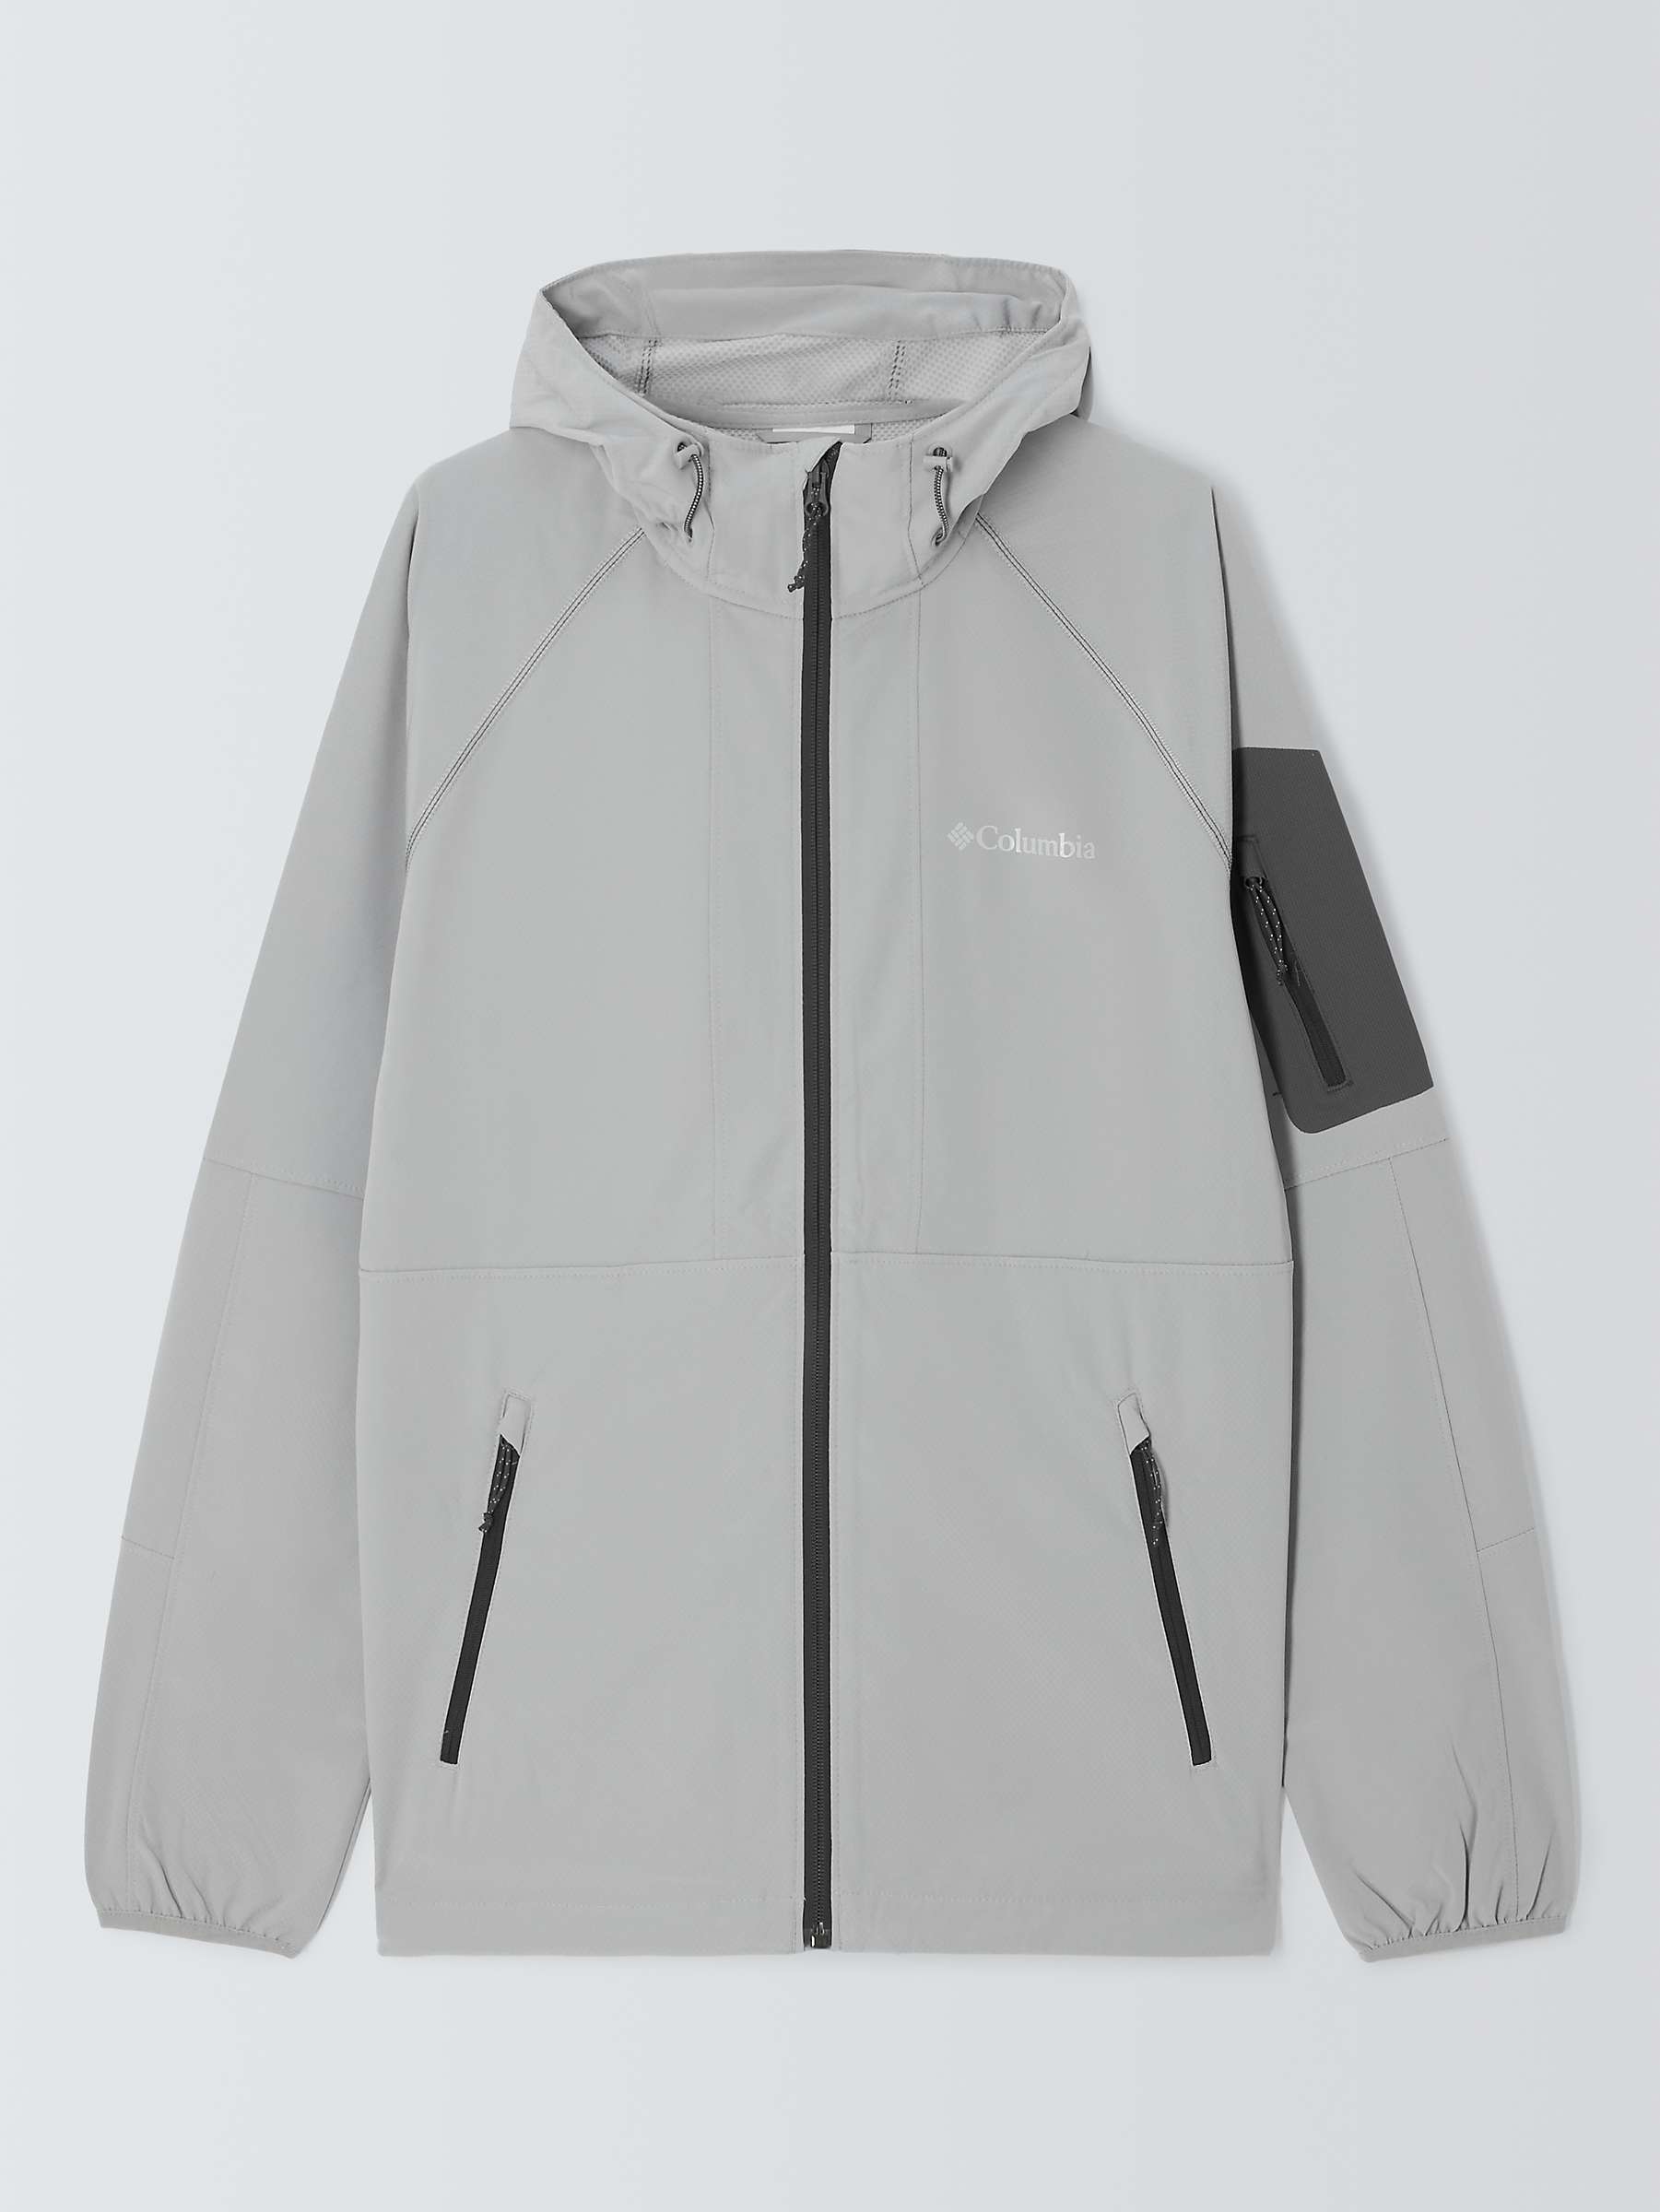 Buy Columbia Men's Tall Heights Hooded Softshell Jacket Online at johnlewis.com